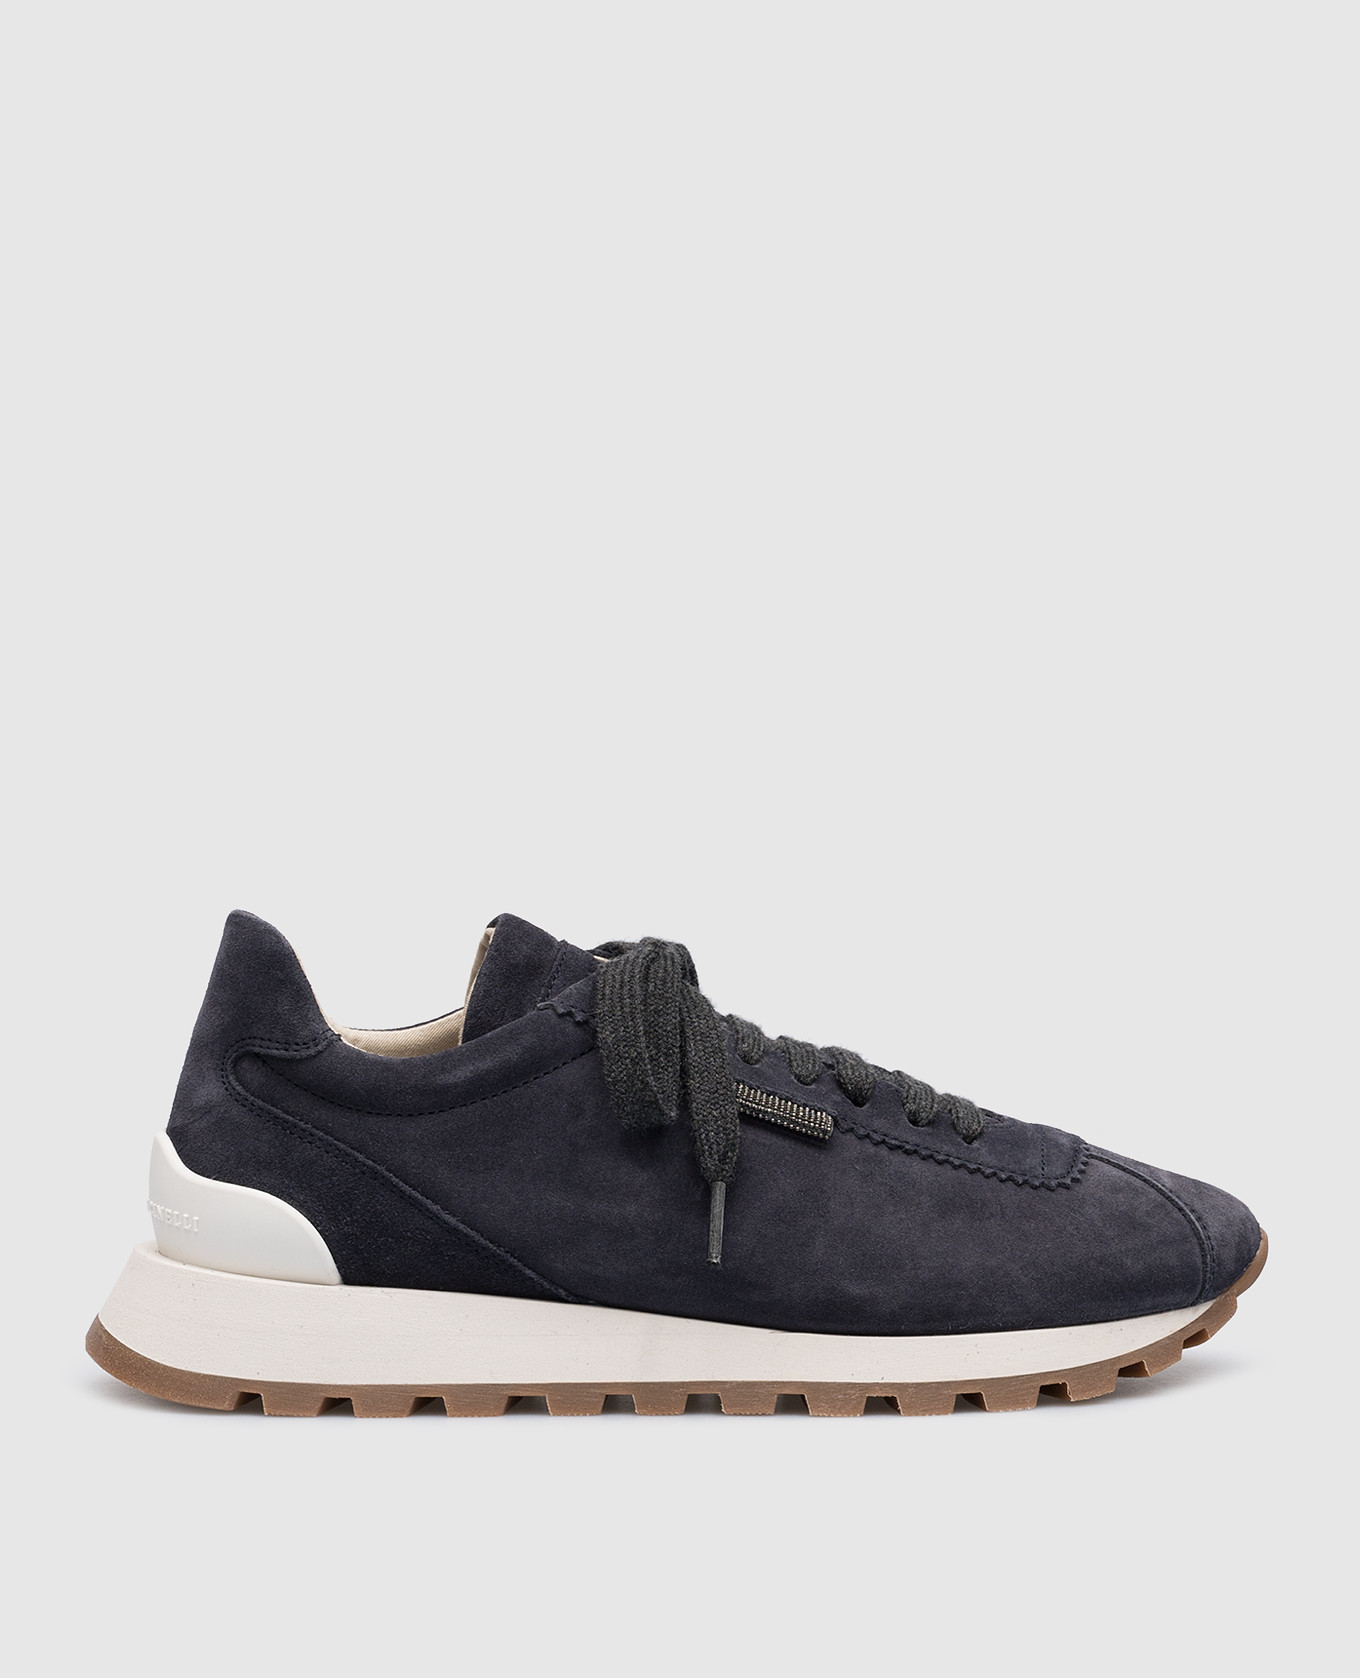 Blue suede sneakers with monil chain